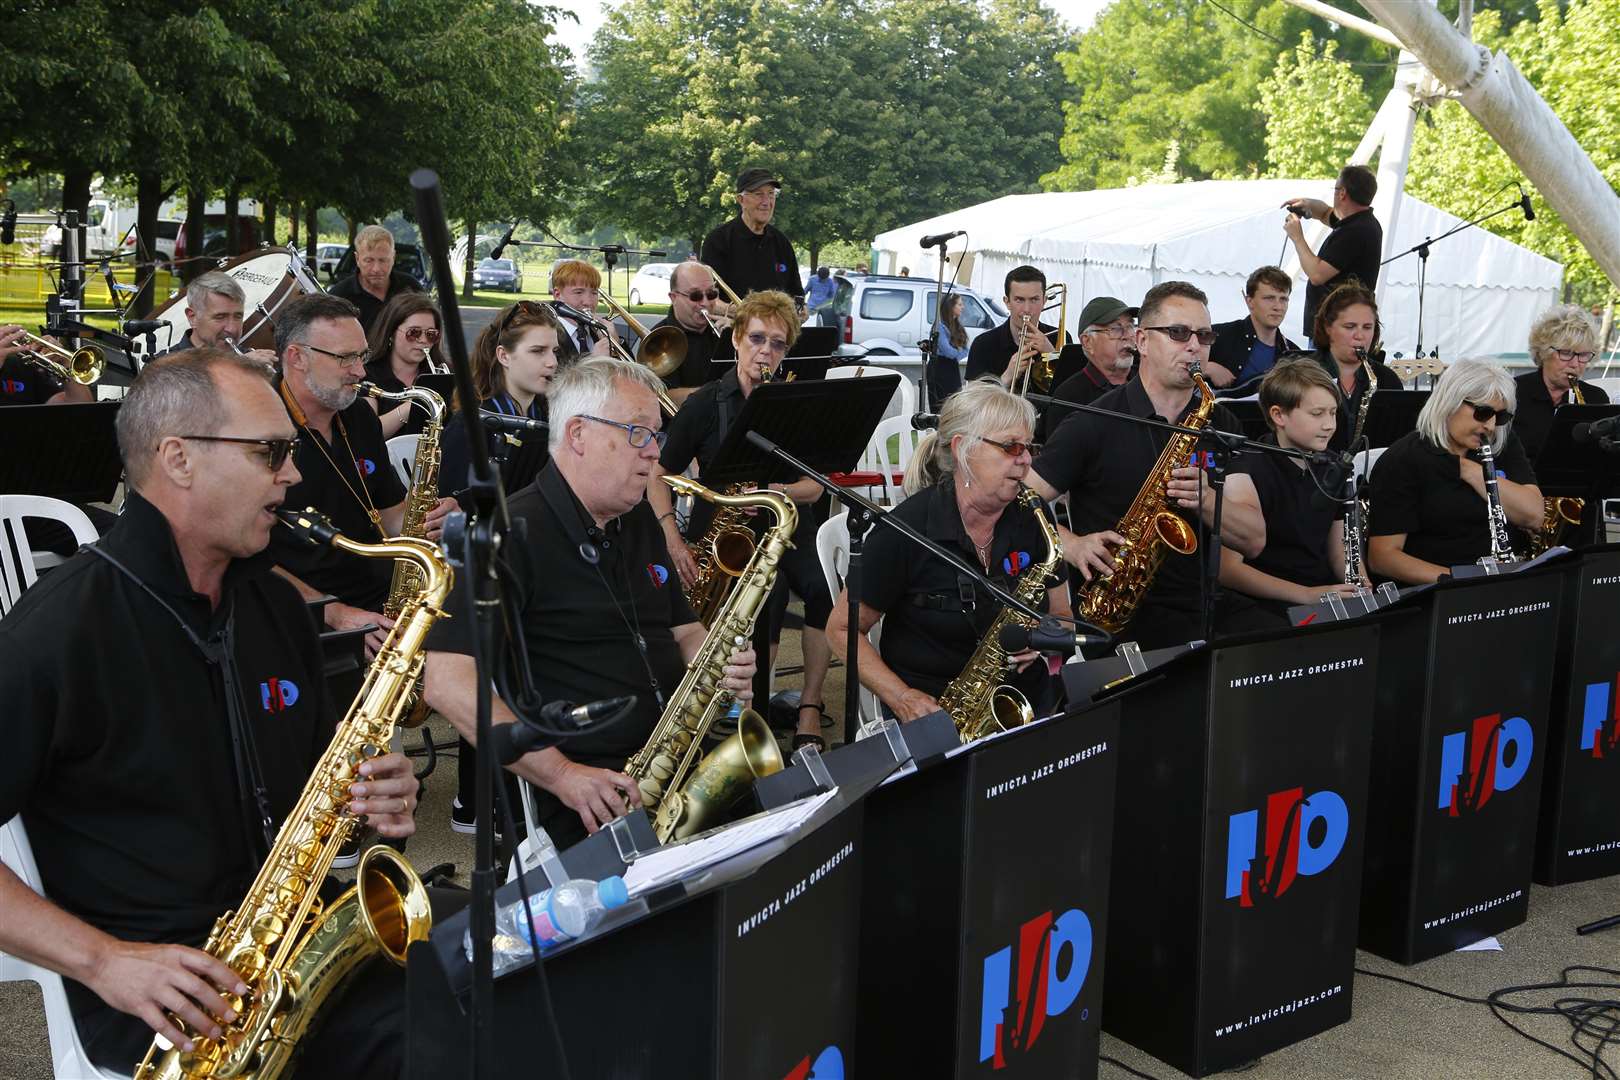 The Invicta Jazz Orchestra play at this year's Proms in the Park